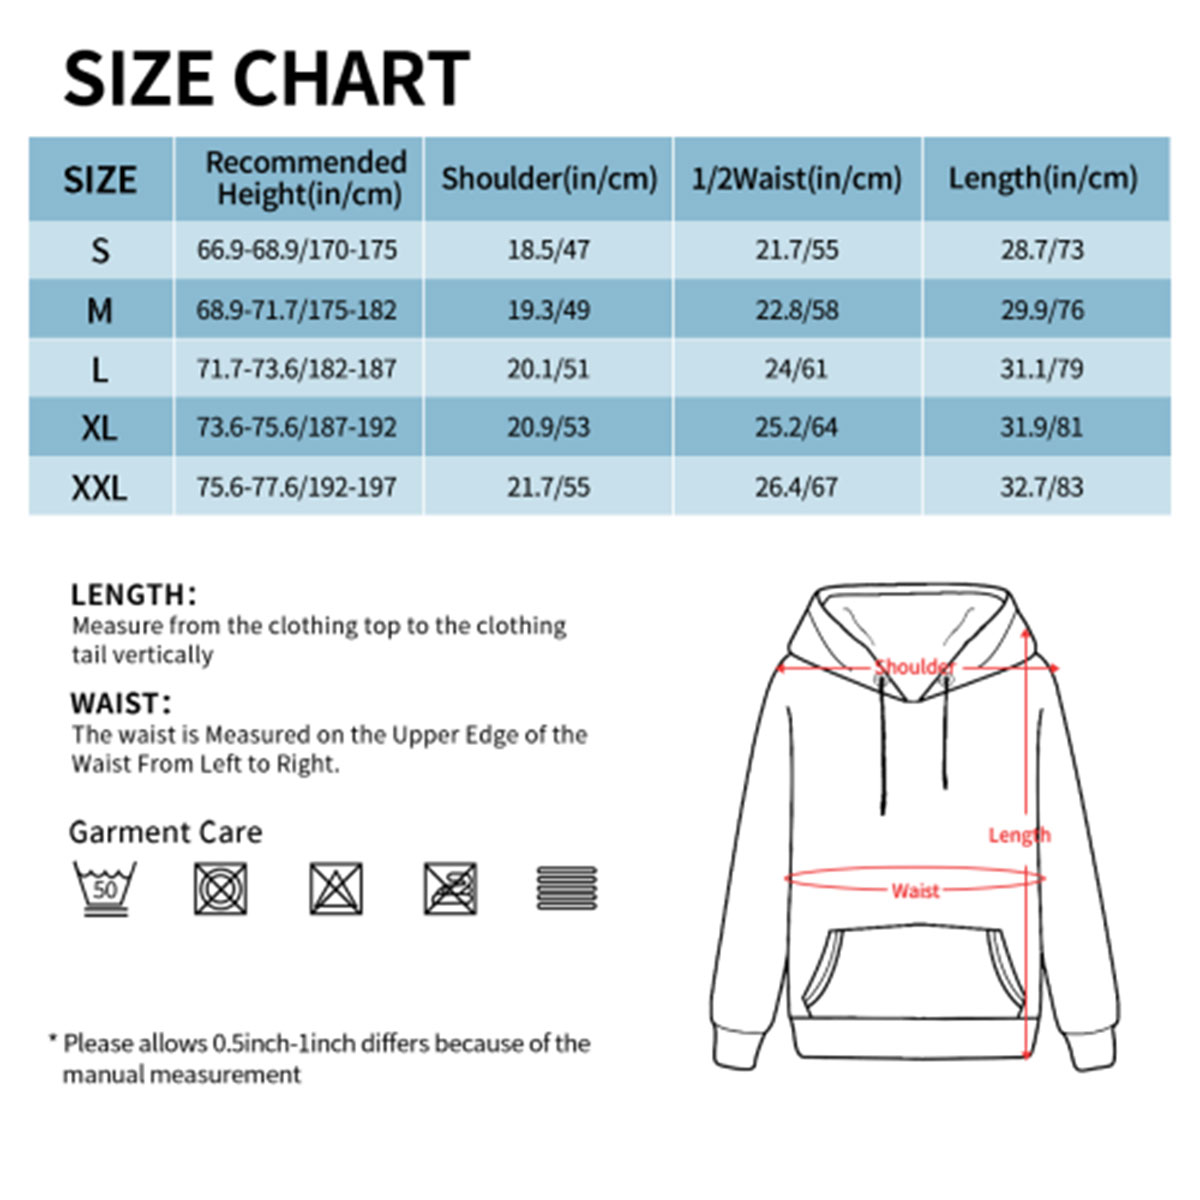 Print On Demand Polyester Fleece Hoodie with Automated Fulfillment ...